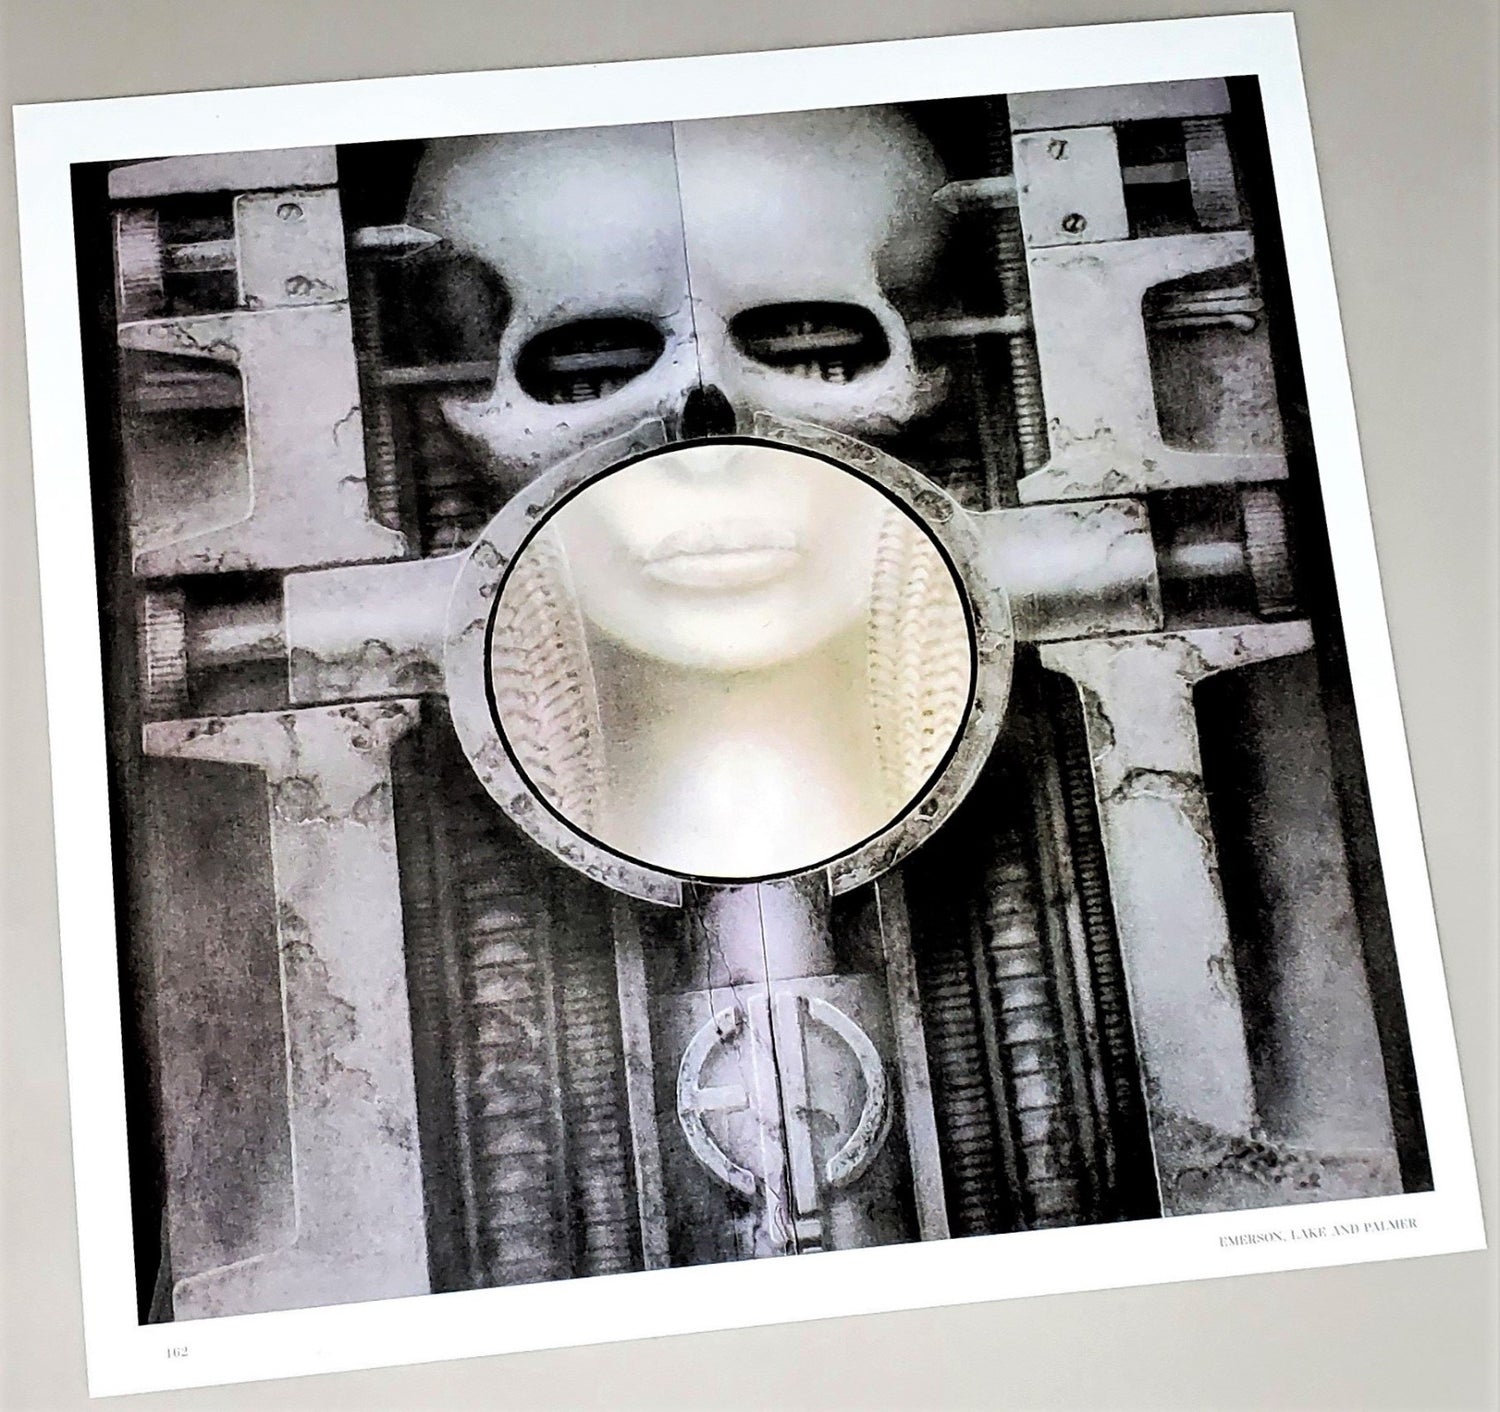 Emerson, Lake And Palmer 1973 Brain Salad Surgery album cover art page featured in Rock Covers 2014